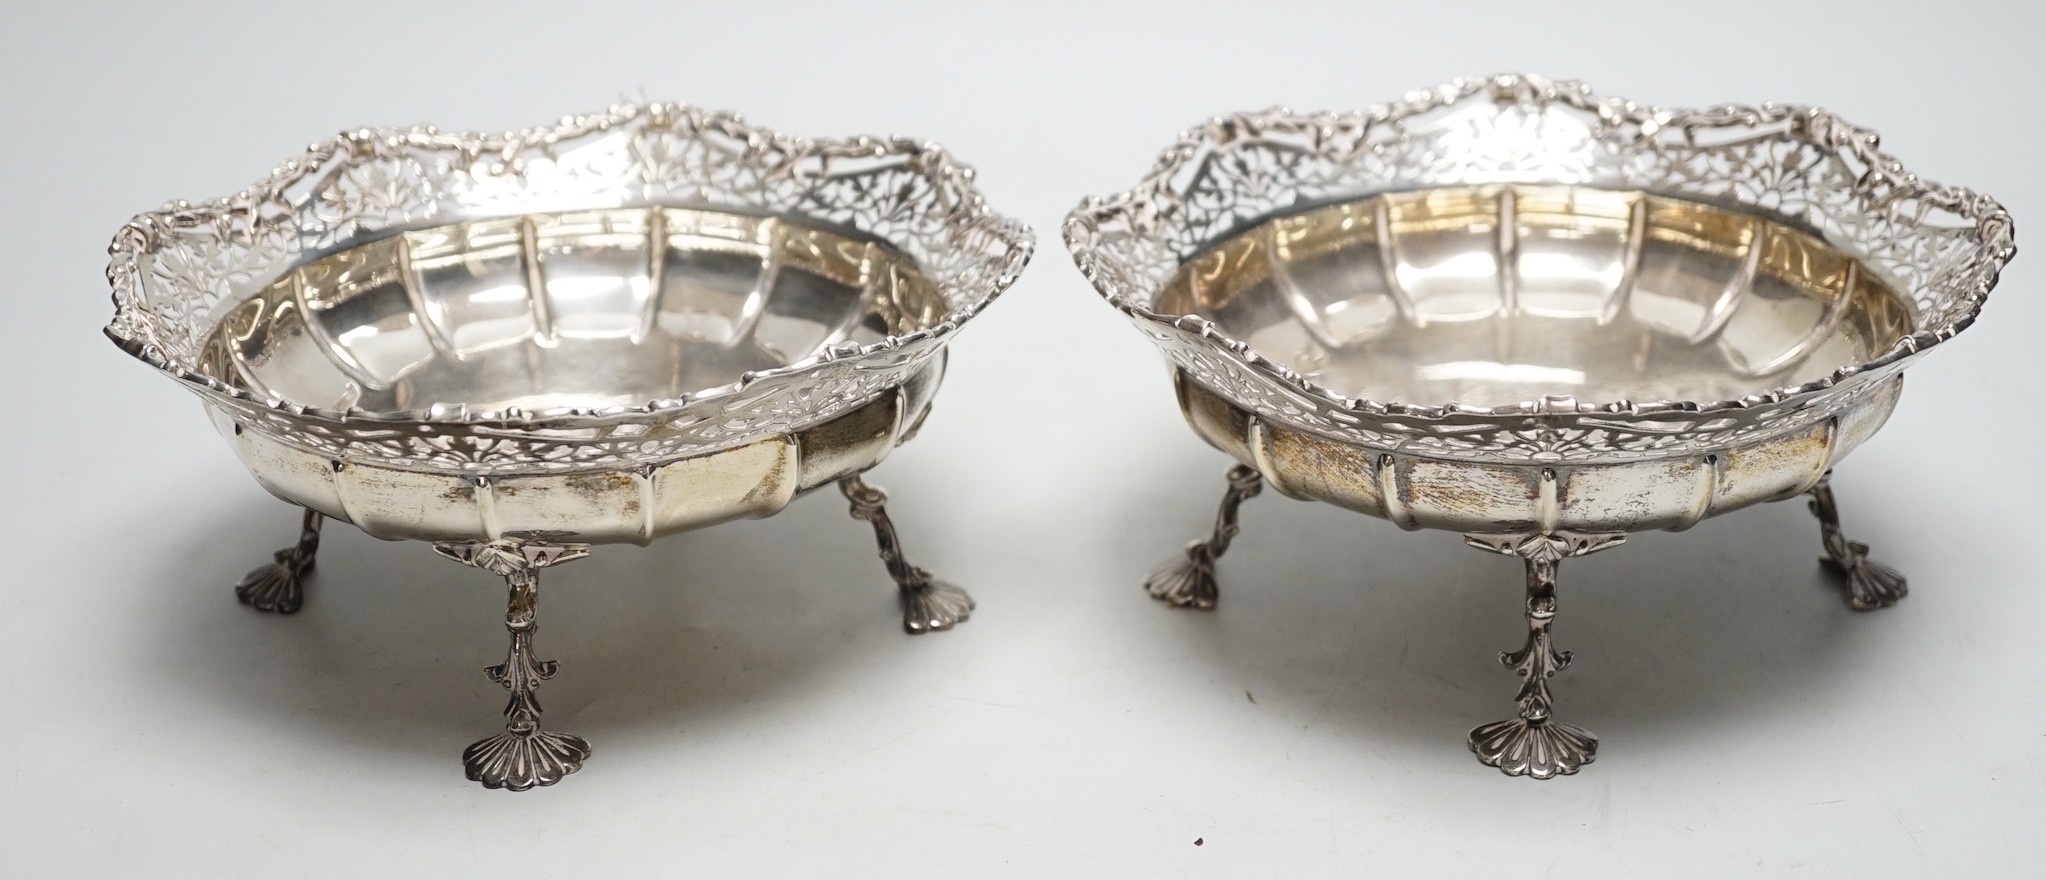 A pair of George VI pierced silver fruit bowls, on quadruped supports, with shell feet, James Ramsay, Birmingham, 1946, diameter 19.2cm, 29.7oz.                                                                            